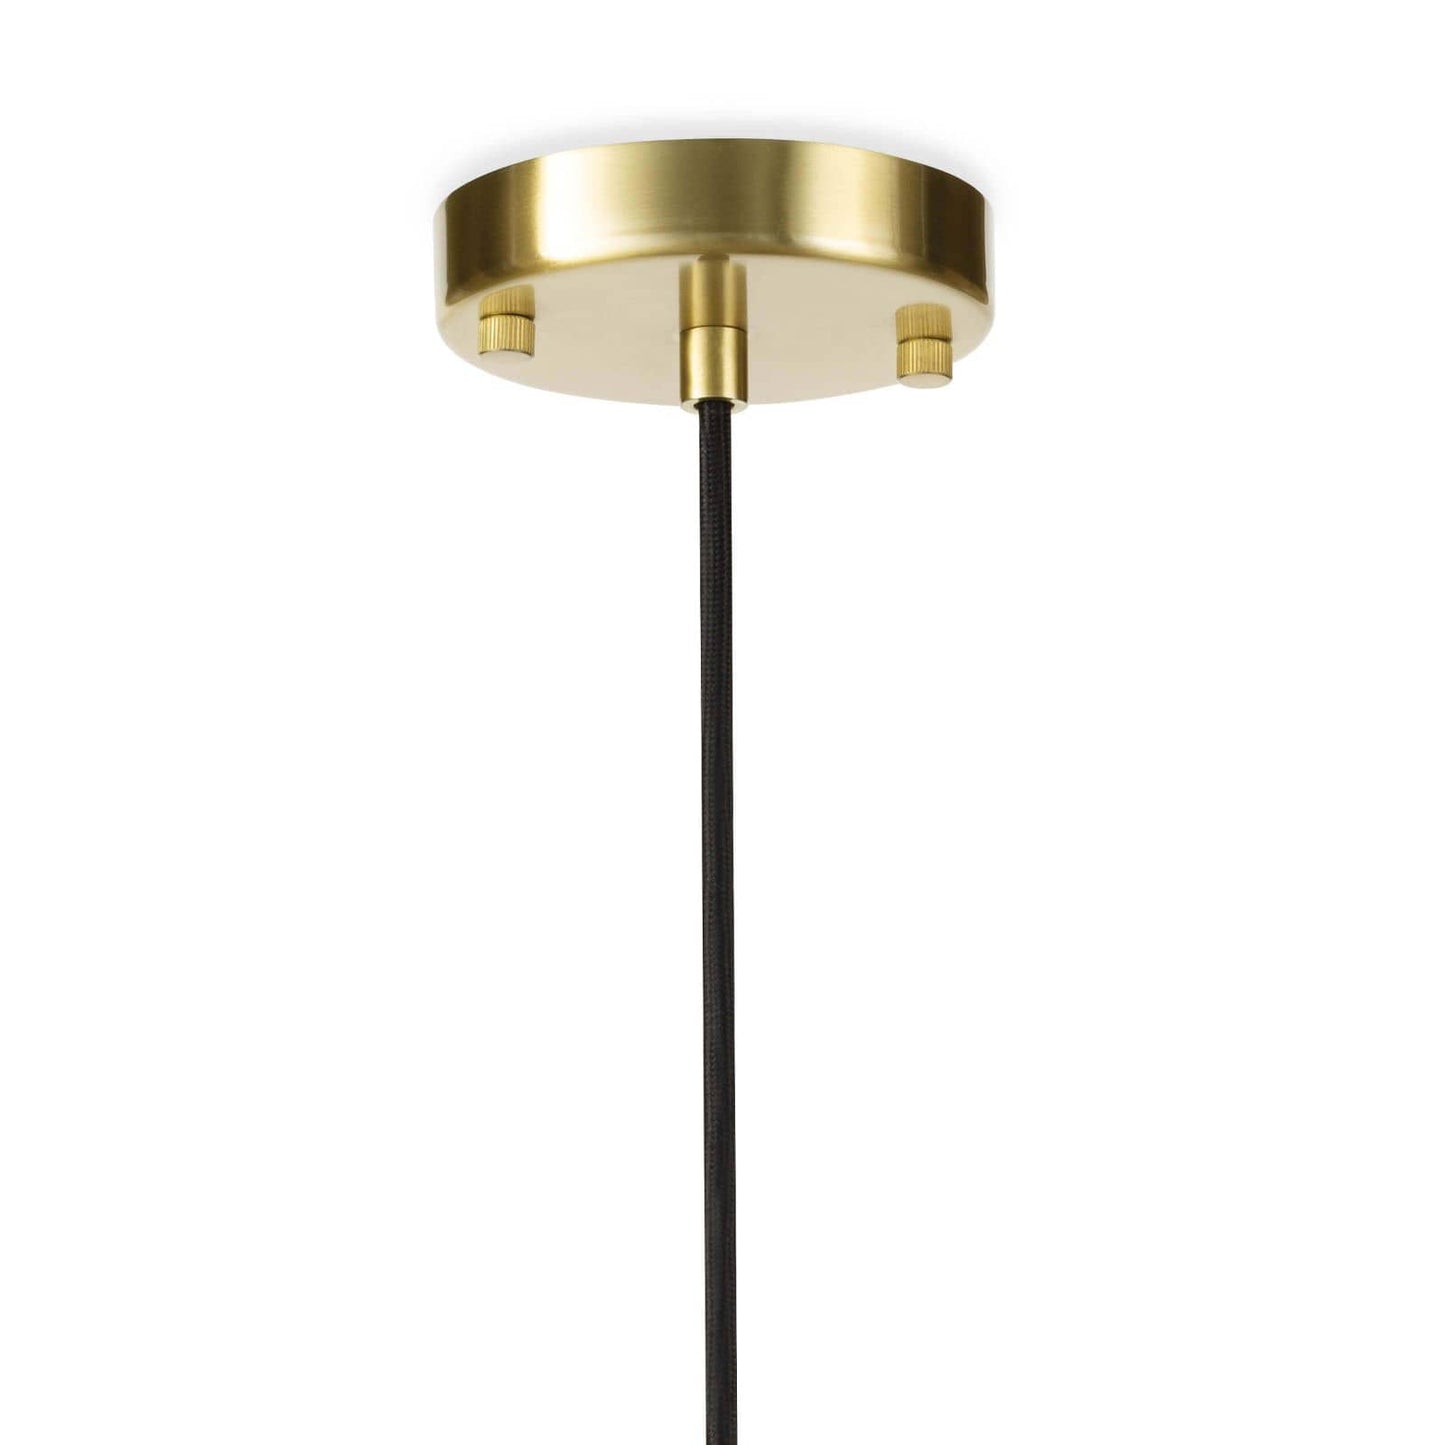 Hilton Pendant in Blackened Brass and Natural Brass by Regina Andrew